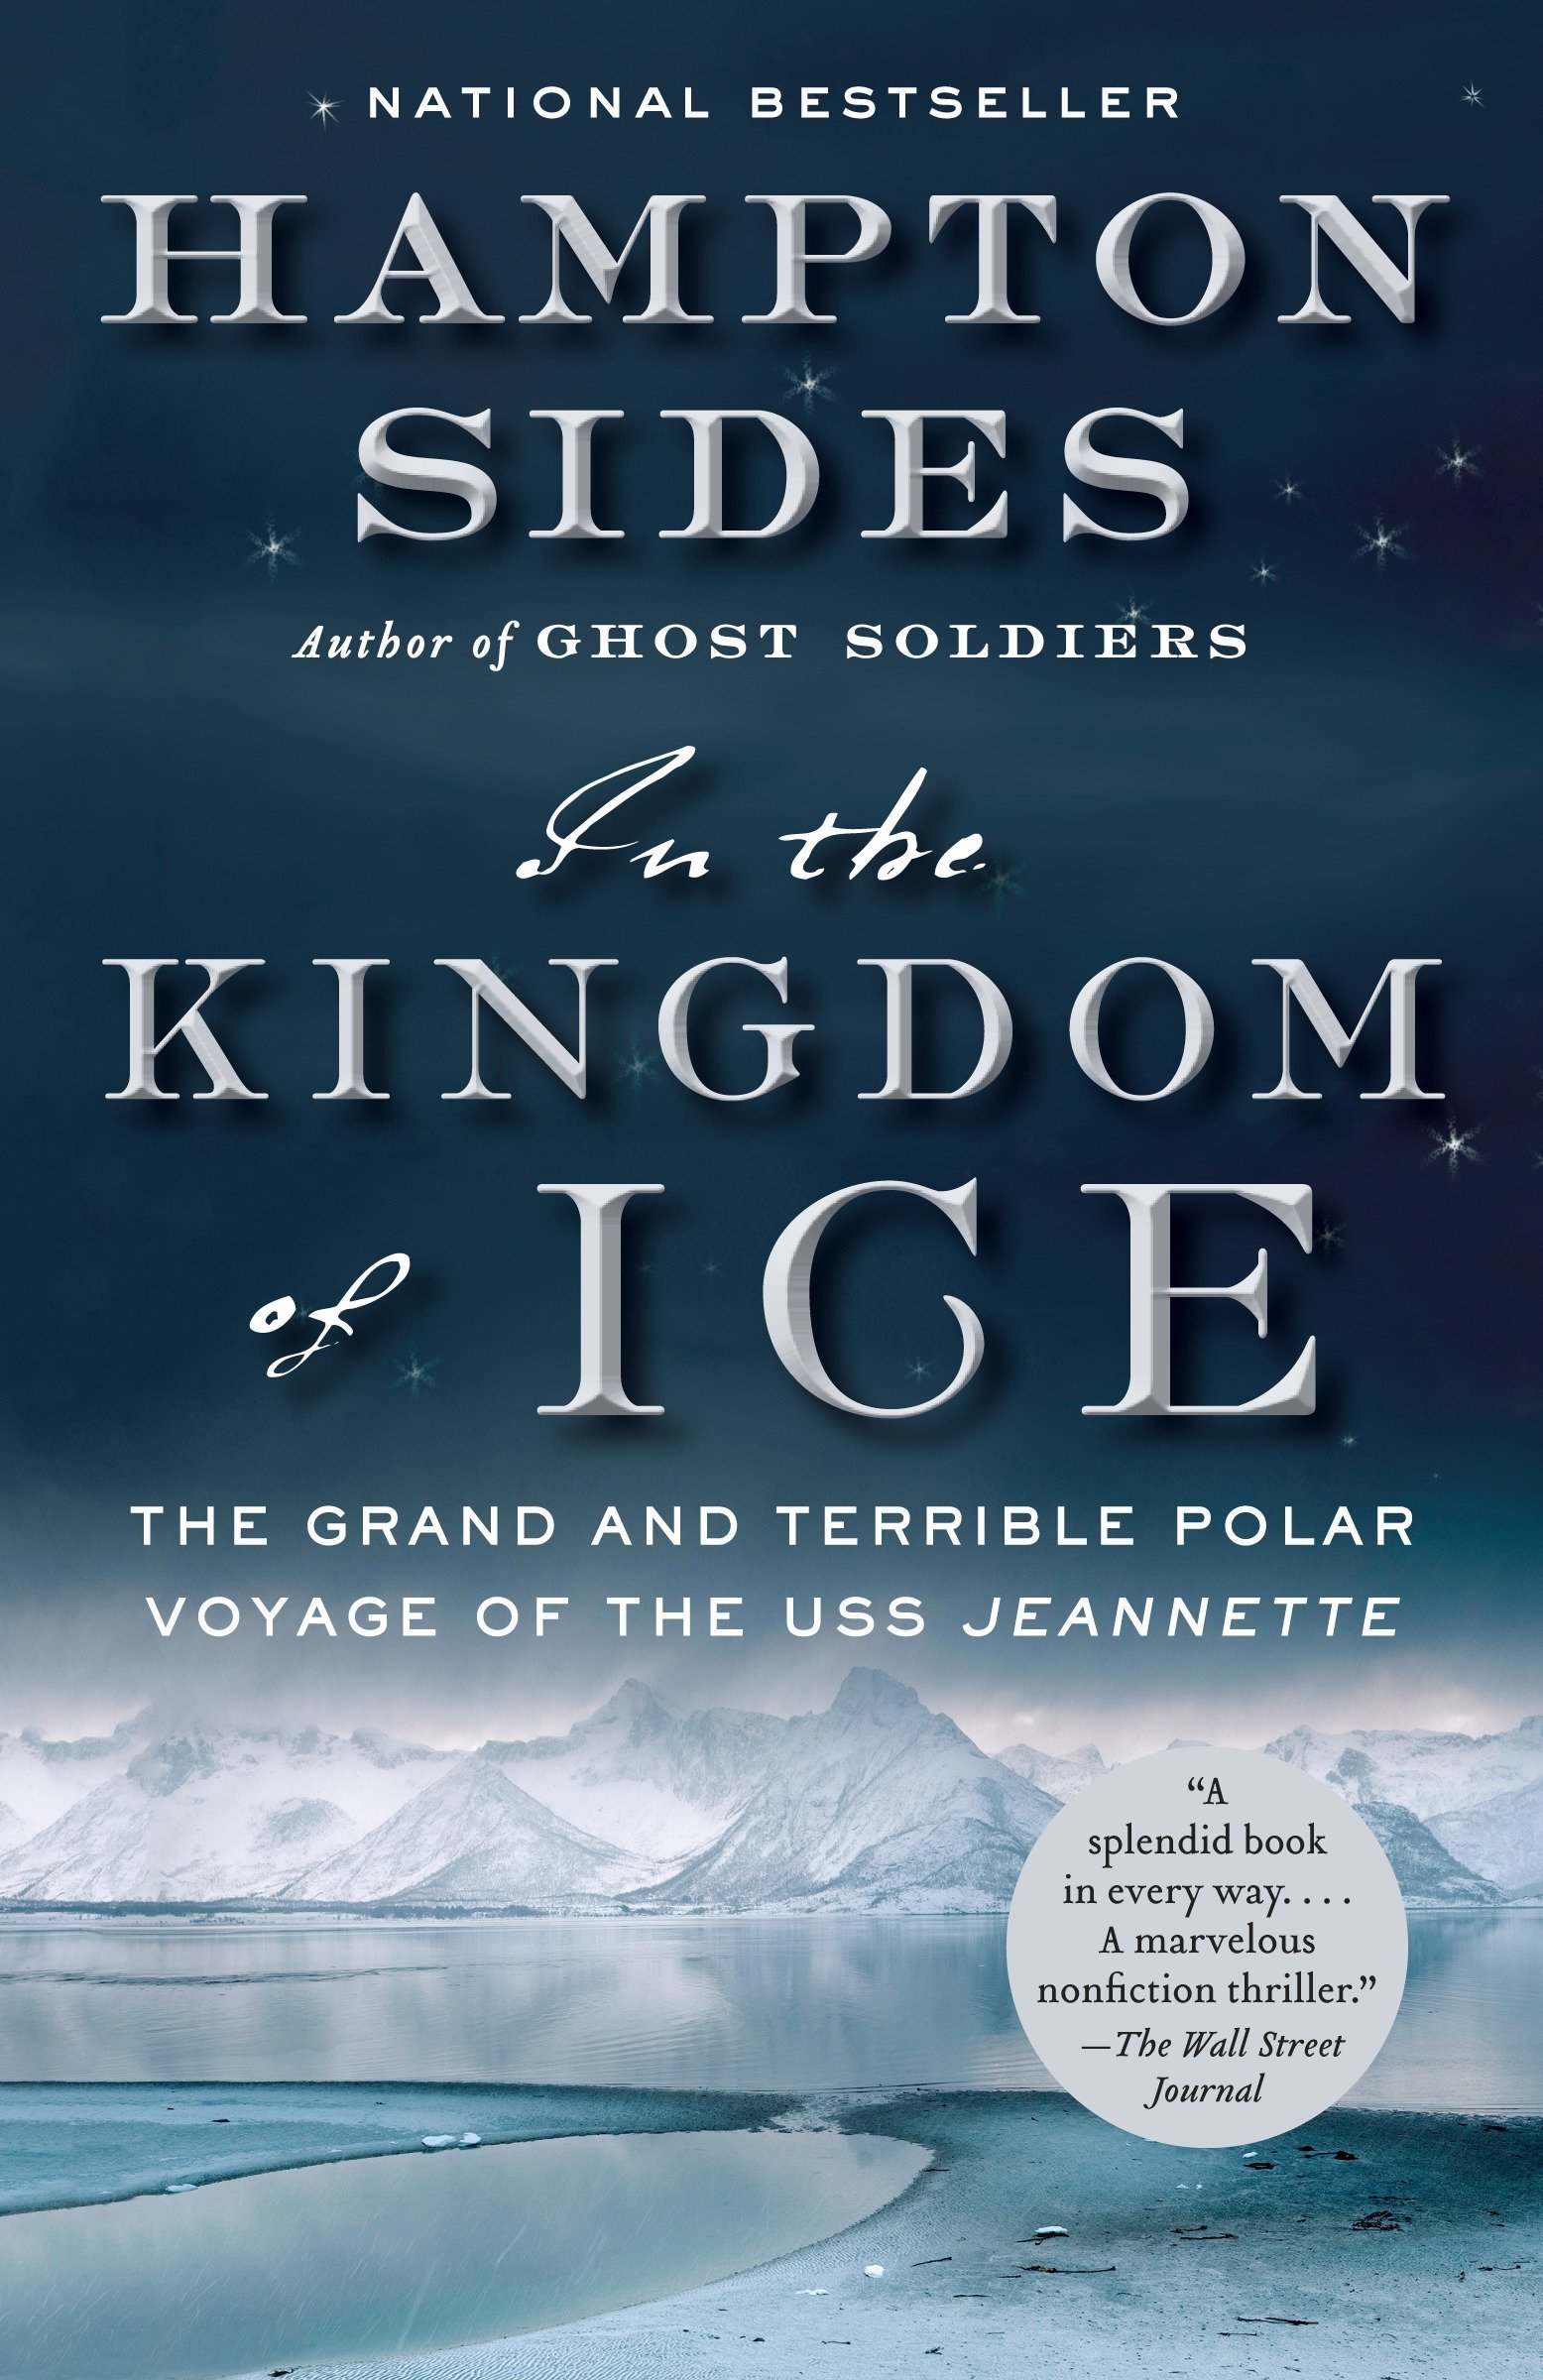 book jacket - images of icebergs / frozen land